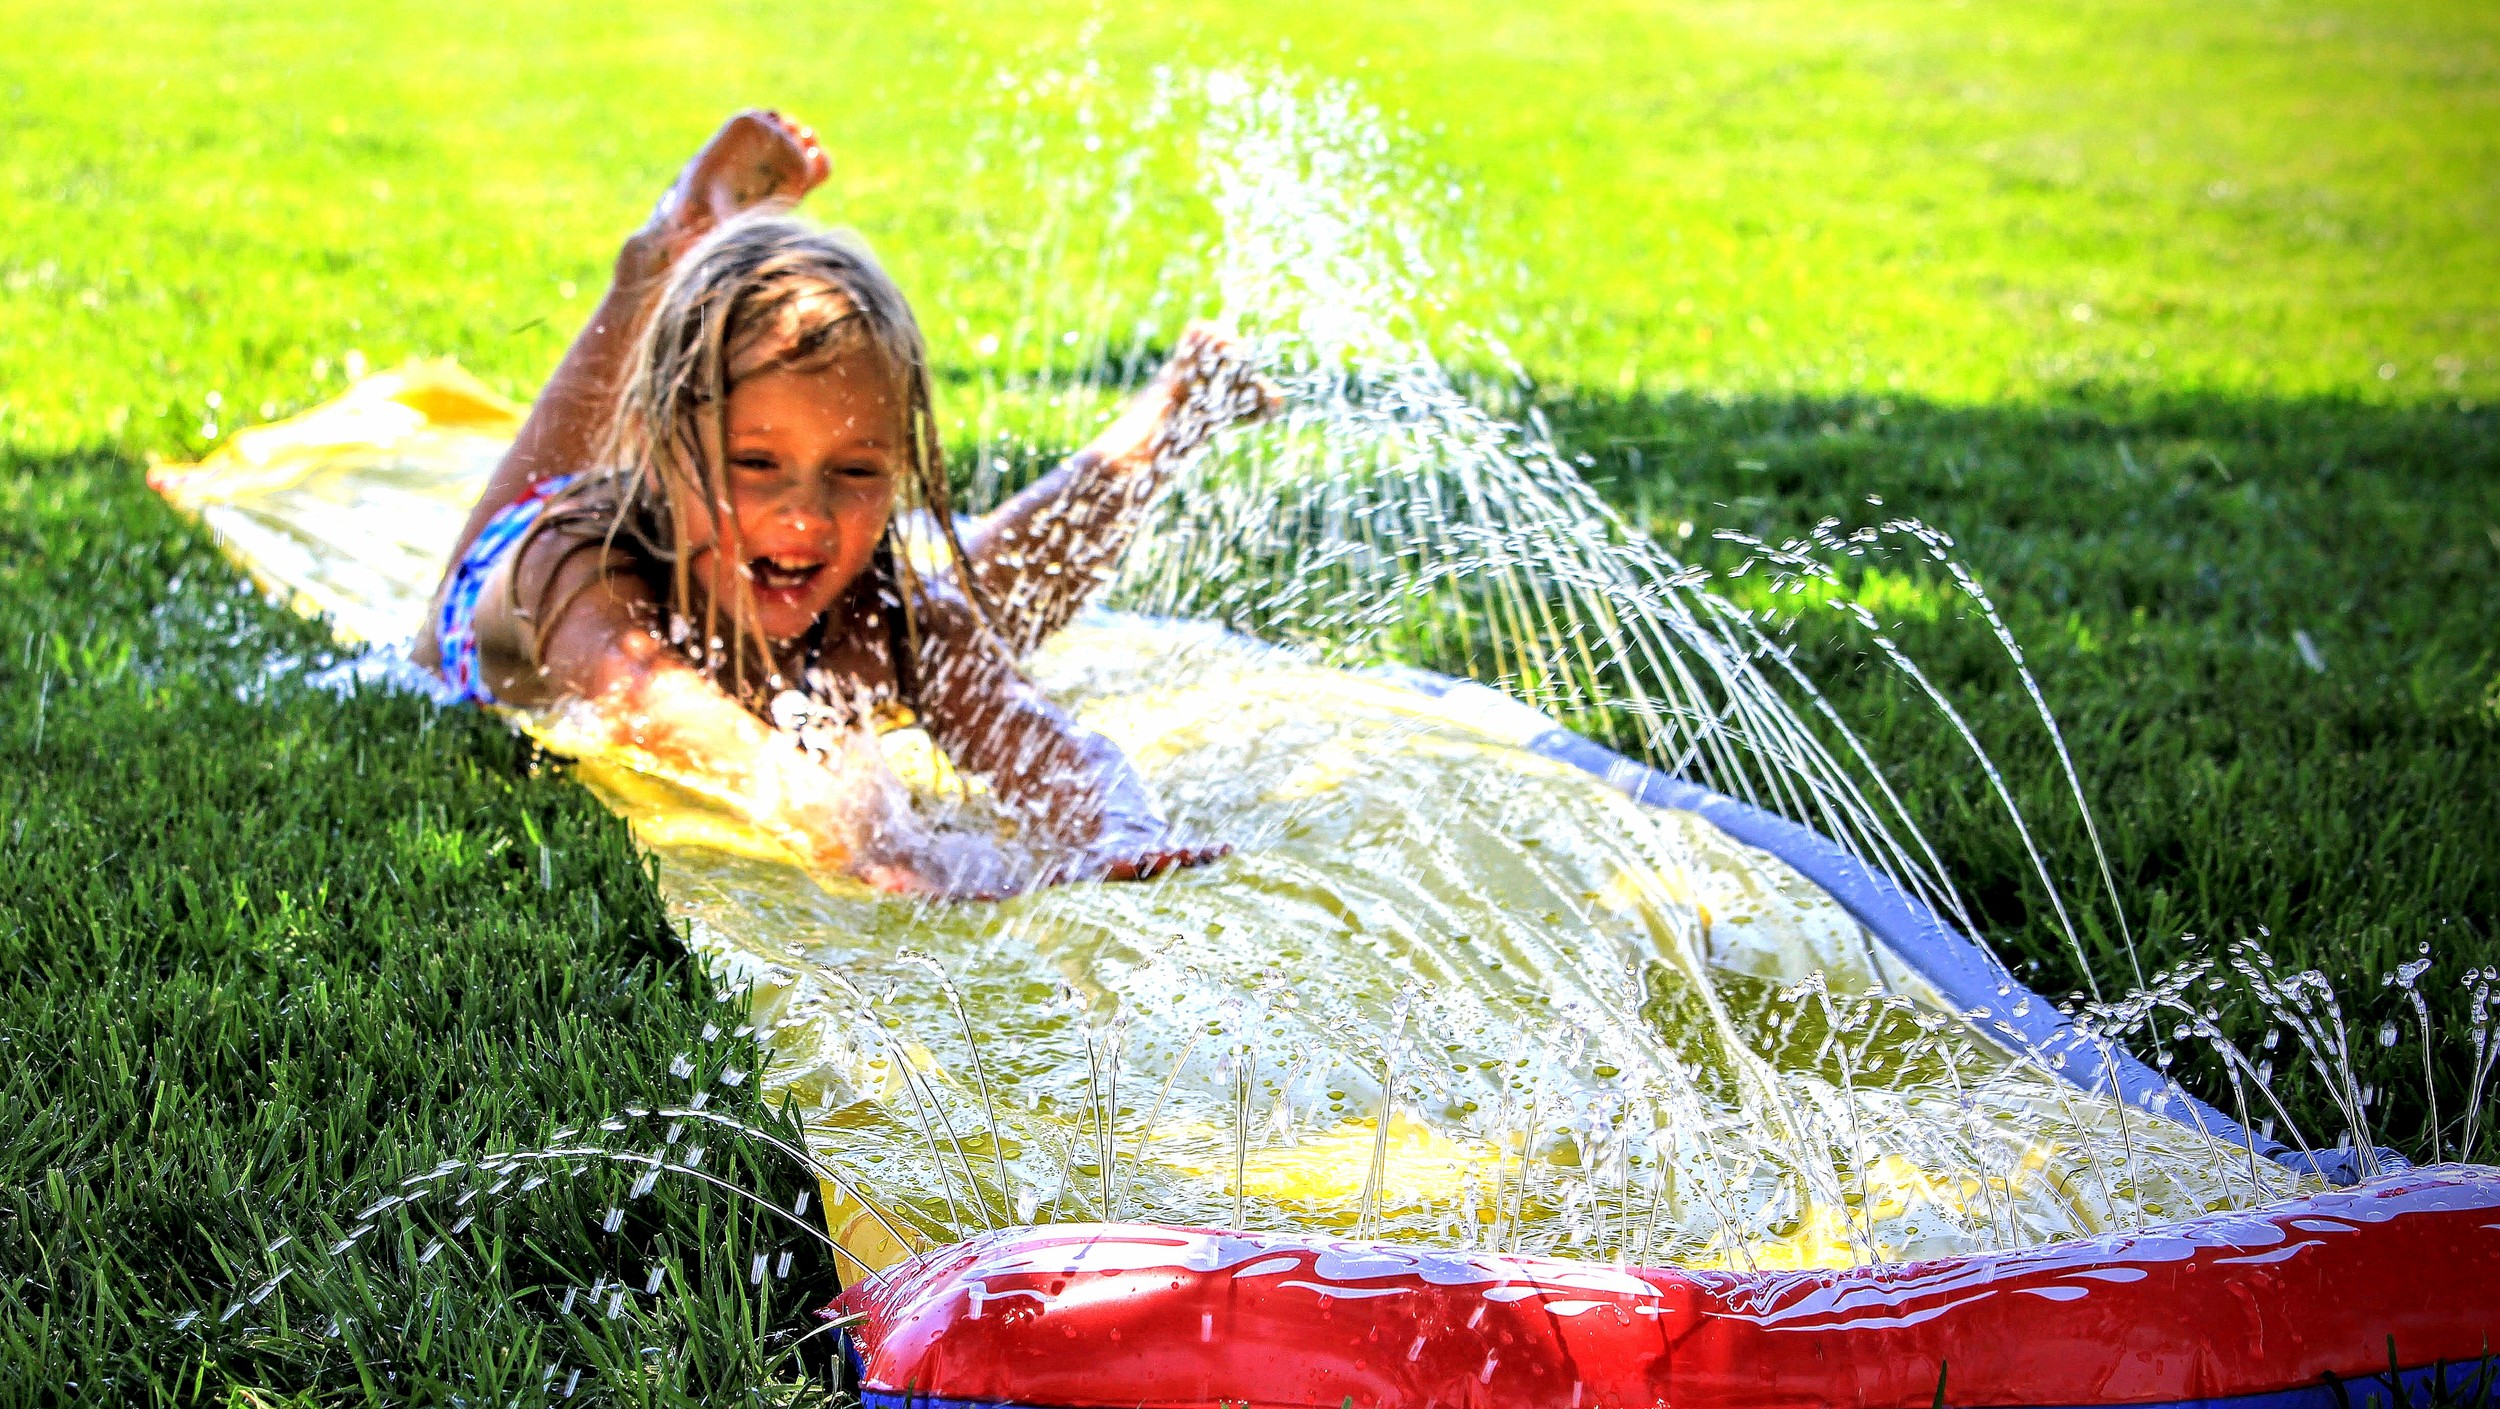 My super-awesome, fun, creative, talented niece enjoying a little summer slip-n-slide. She's going places.